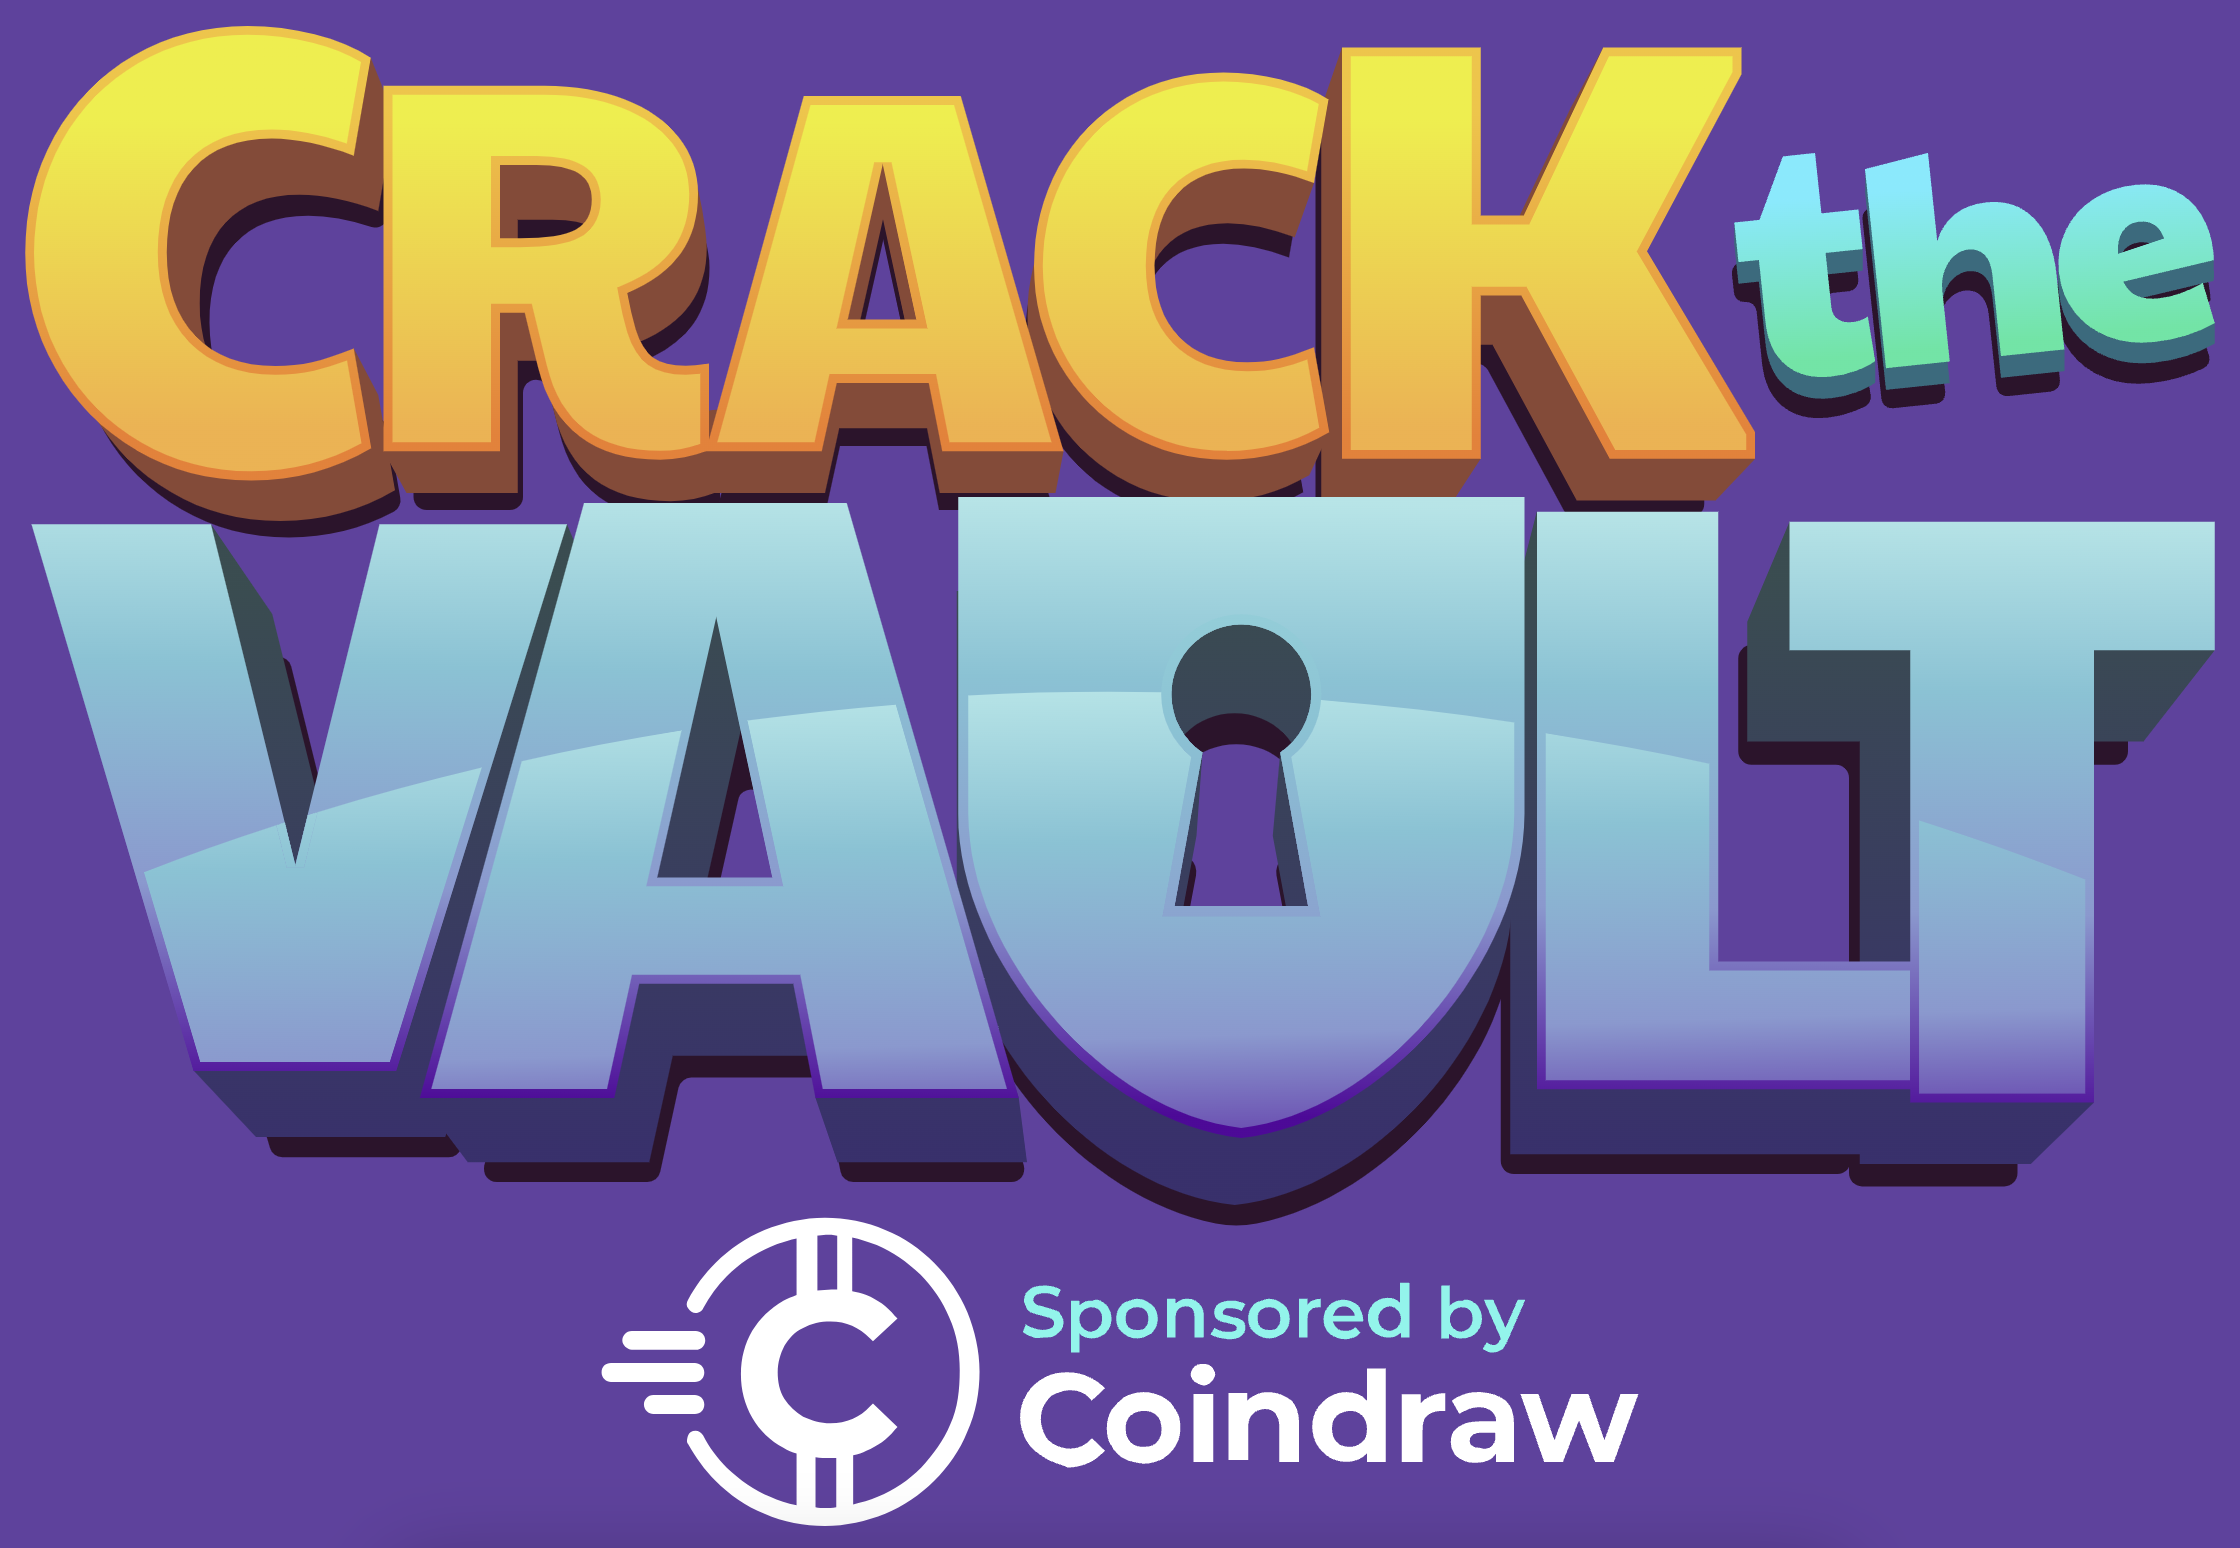 COINDRAW LAUNCHES $250,000 CRACK THE VAULT CAMPAIGN